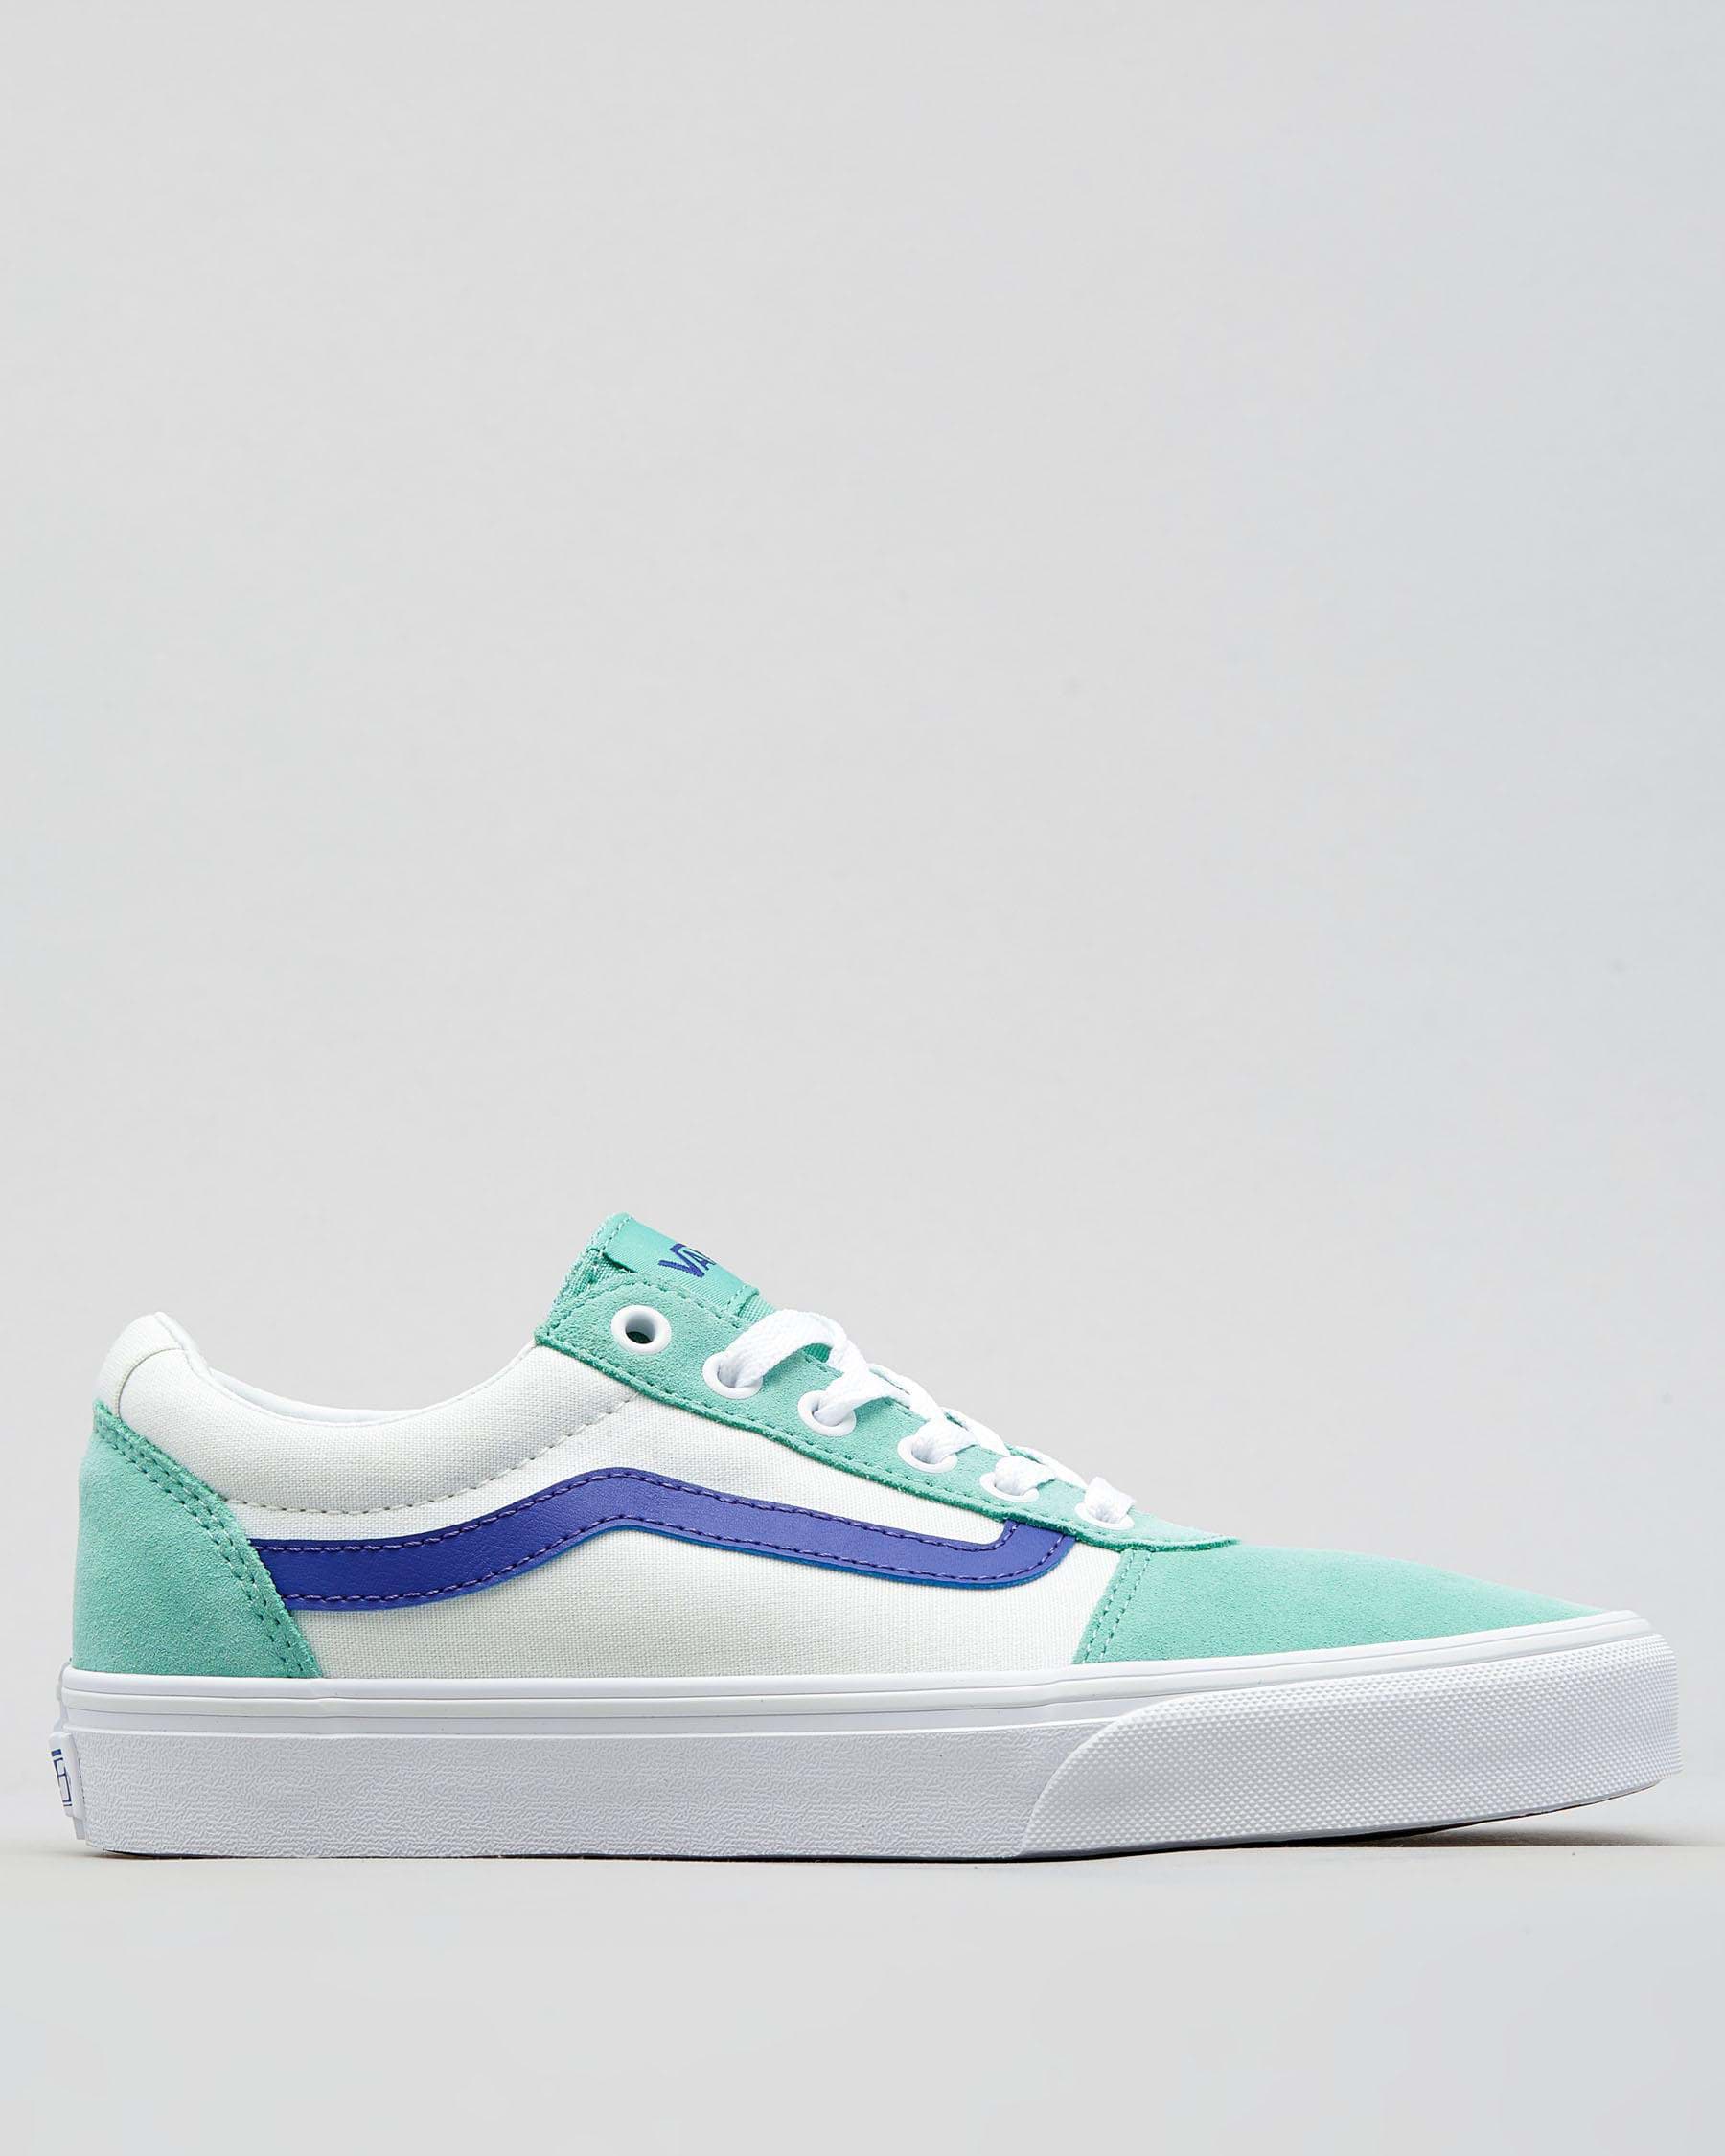 Shop Vans Womens Ward Shoes In Jade Royal Blue - Fast Shipping & Easy ...